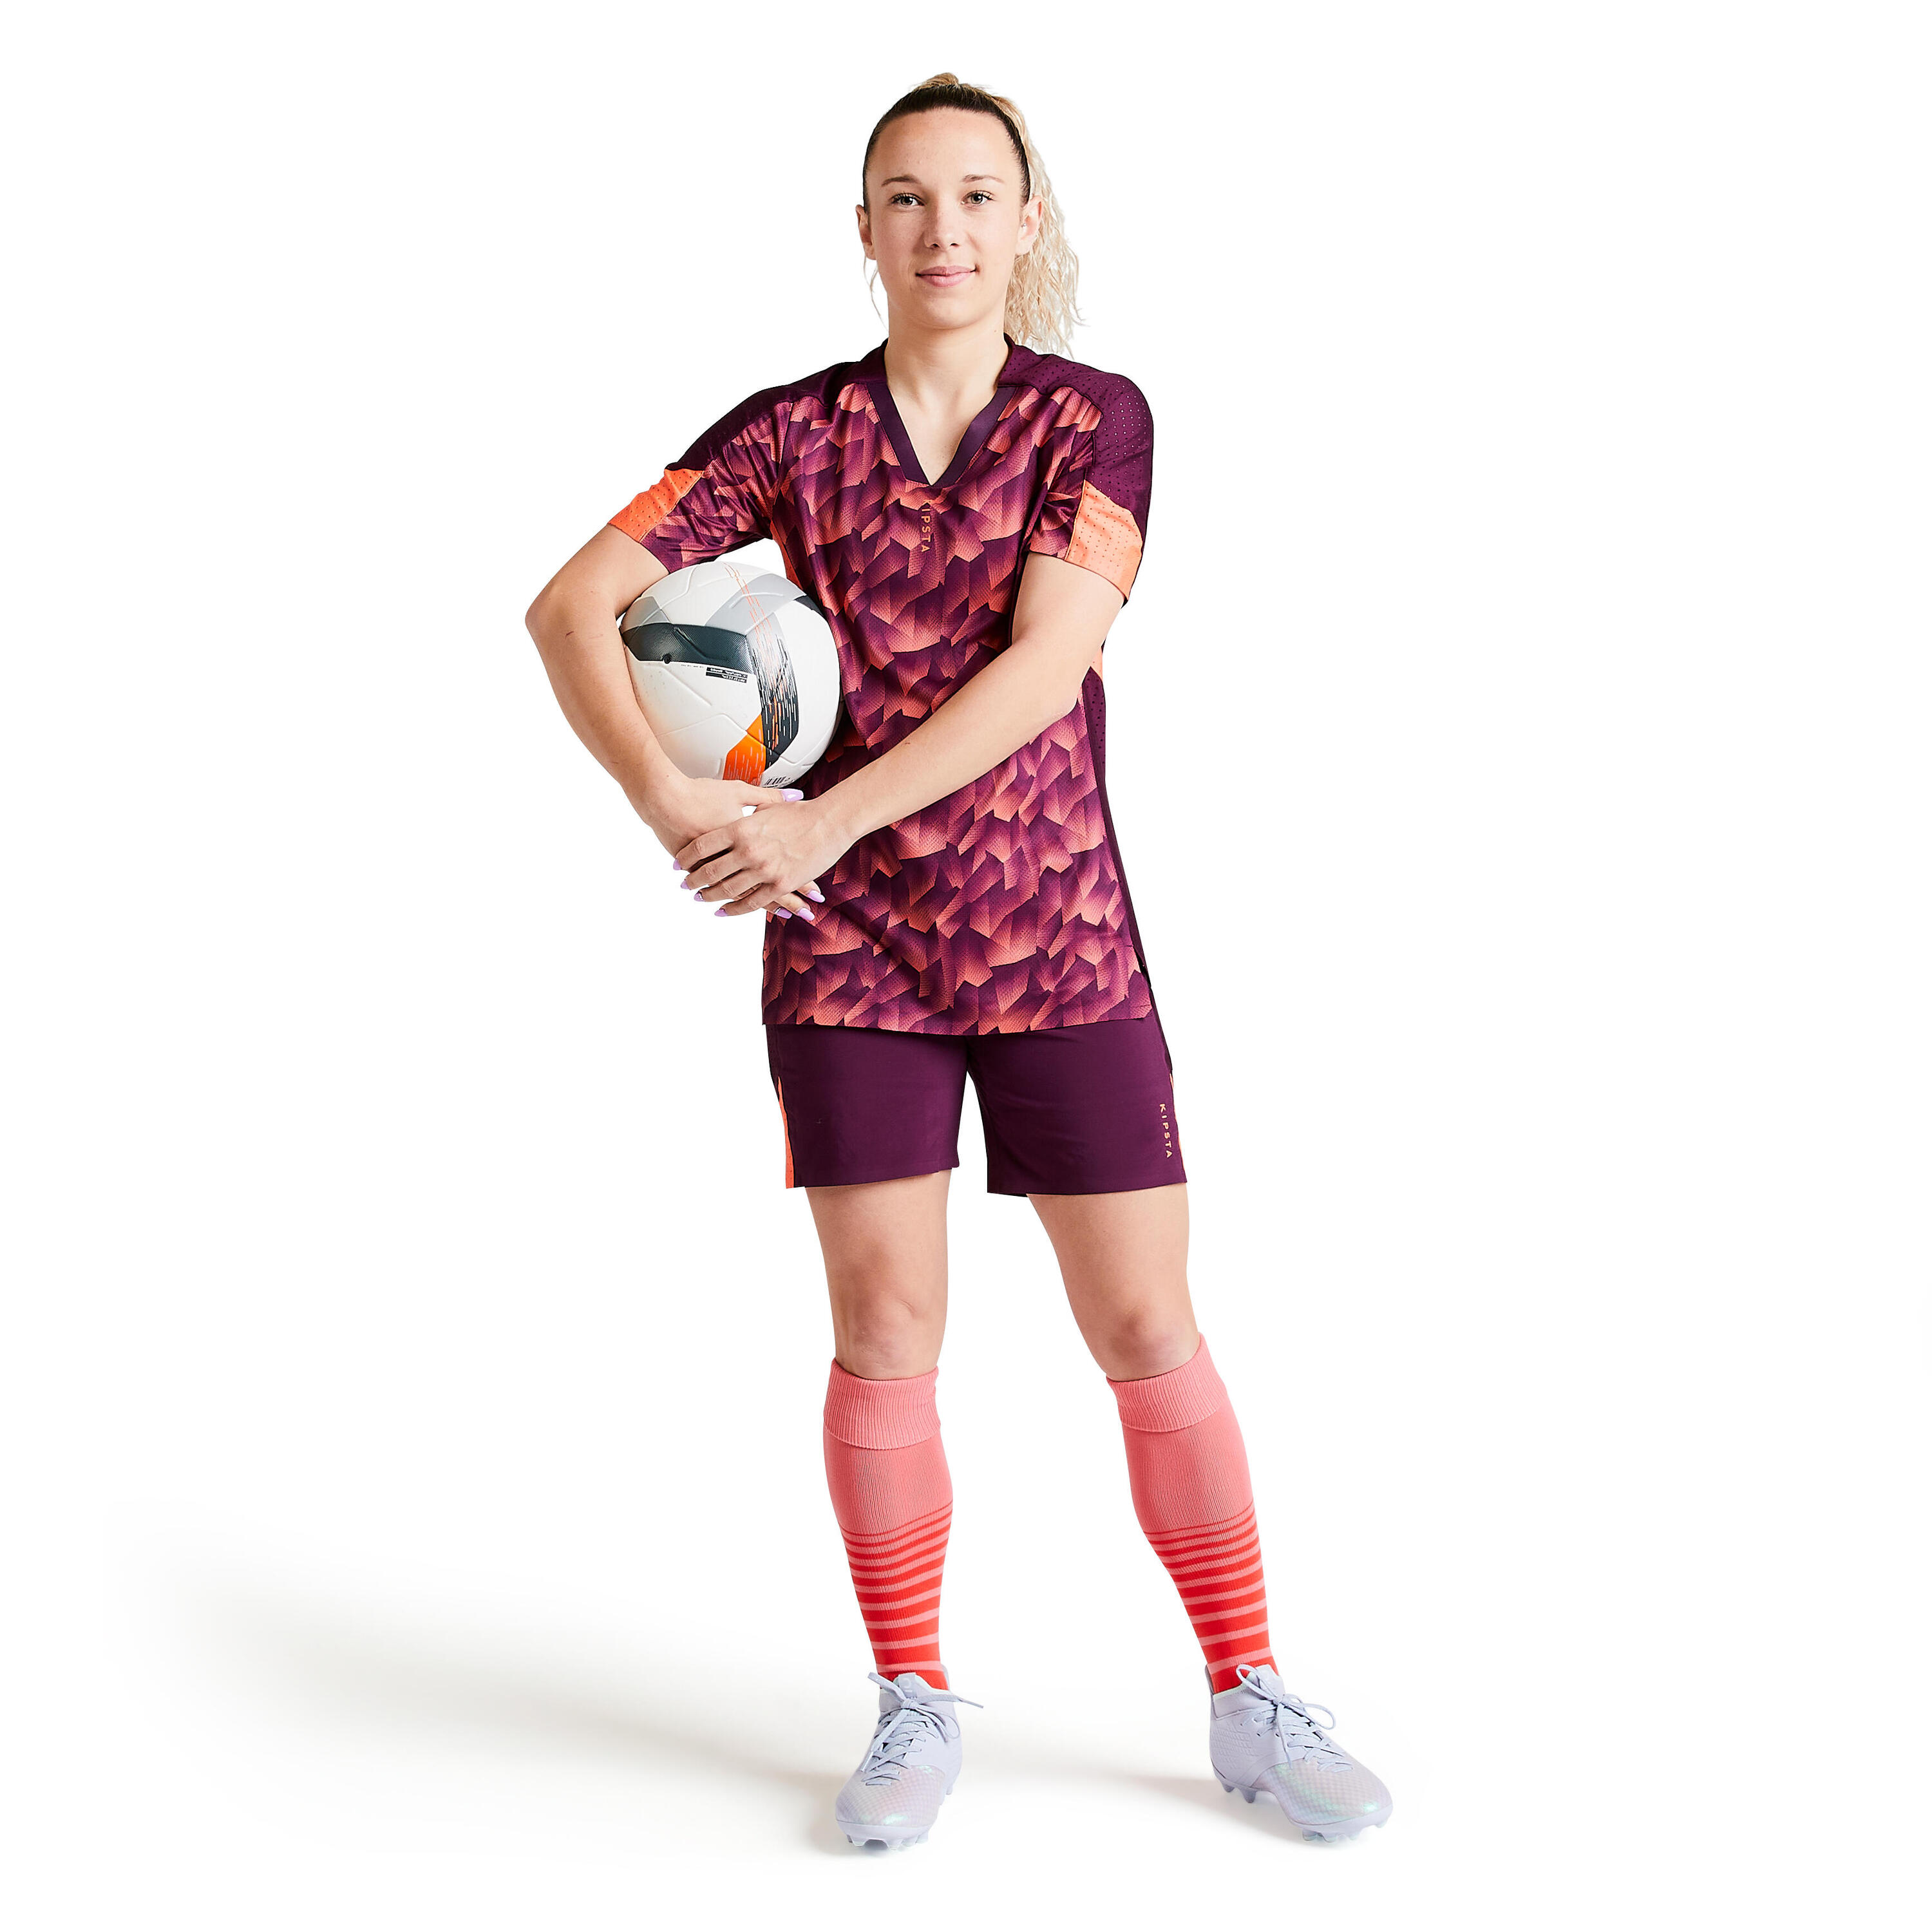 Women's Football Jersey F900 - Coral 29/31